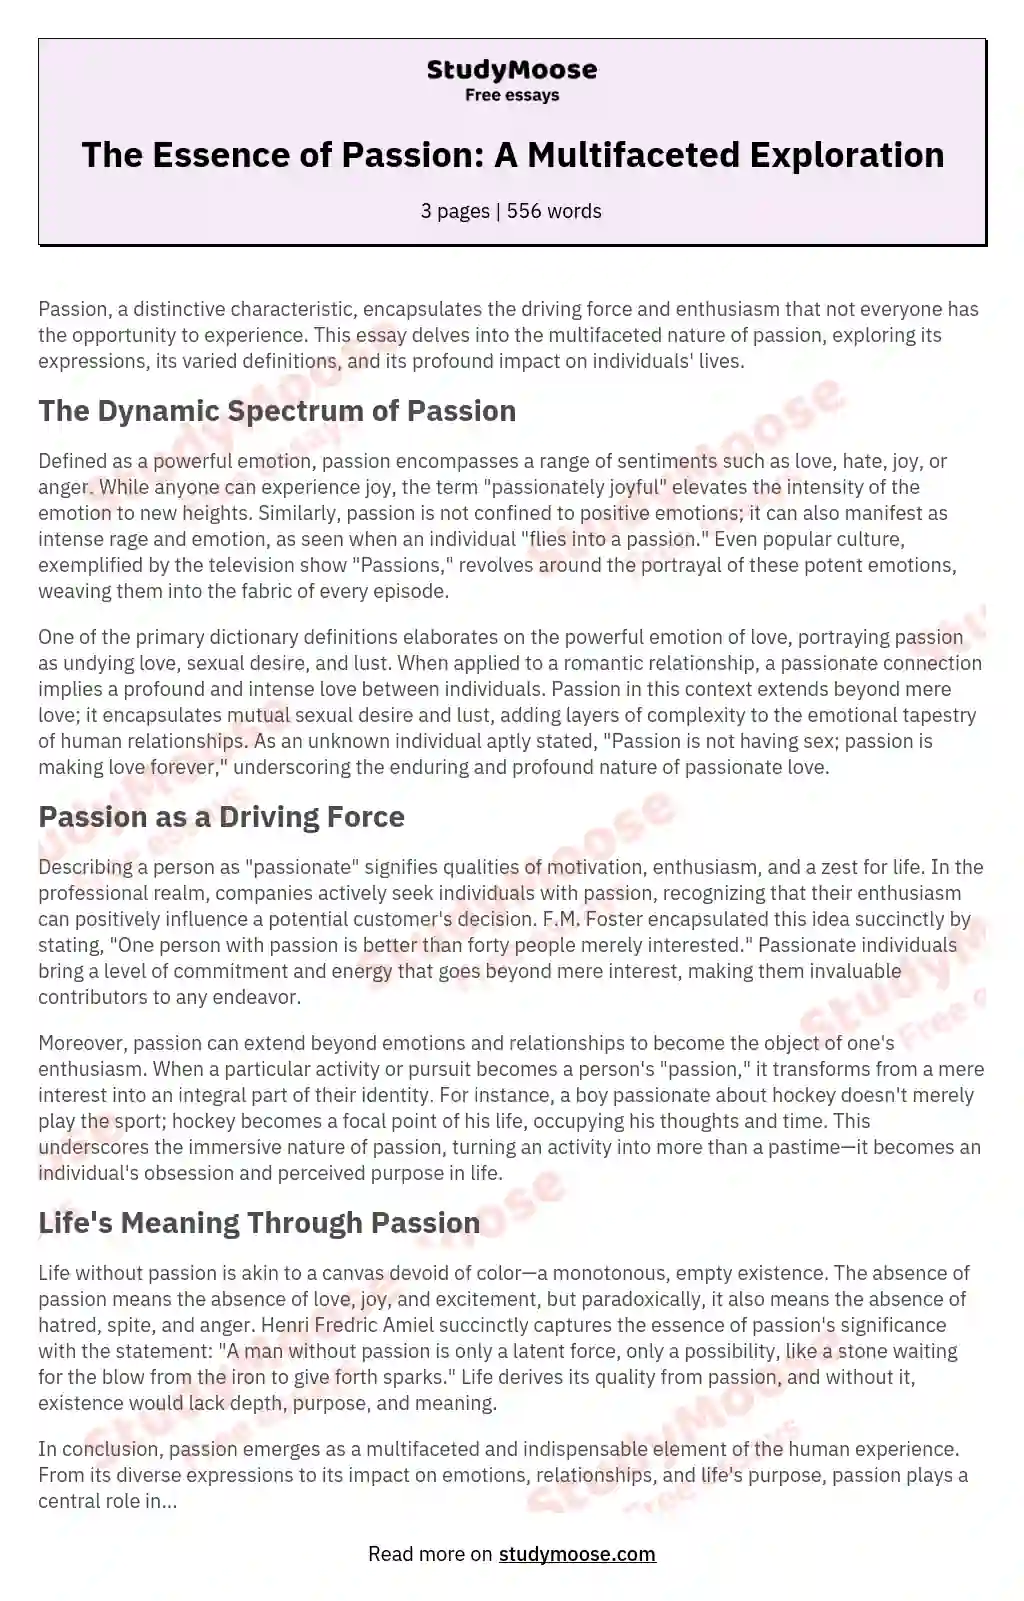 The Essence of Passion: A Multifaceted Exploration essay